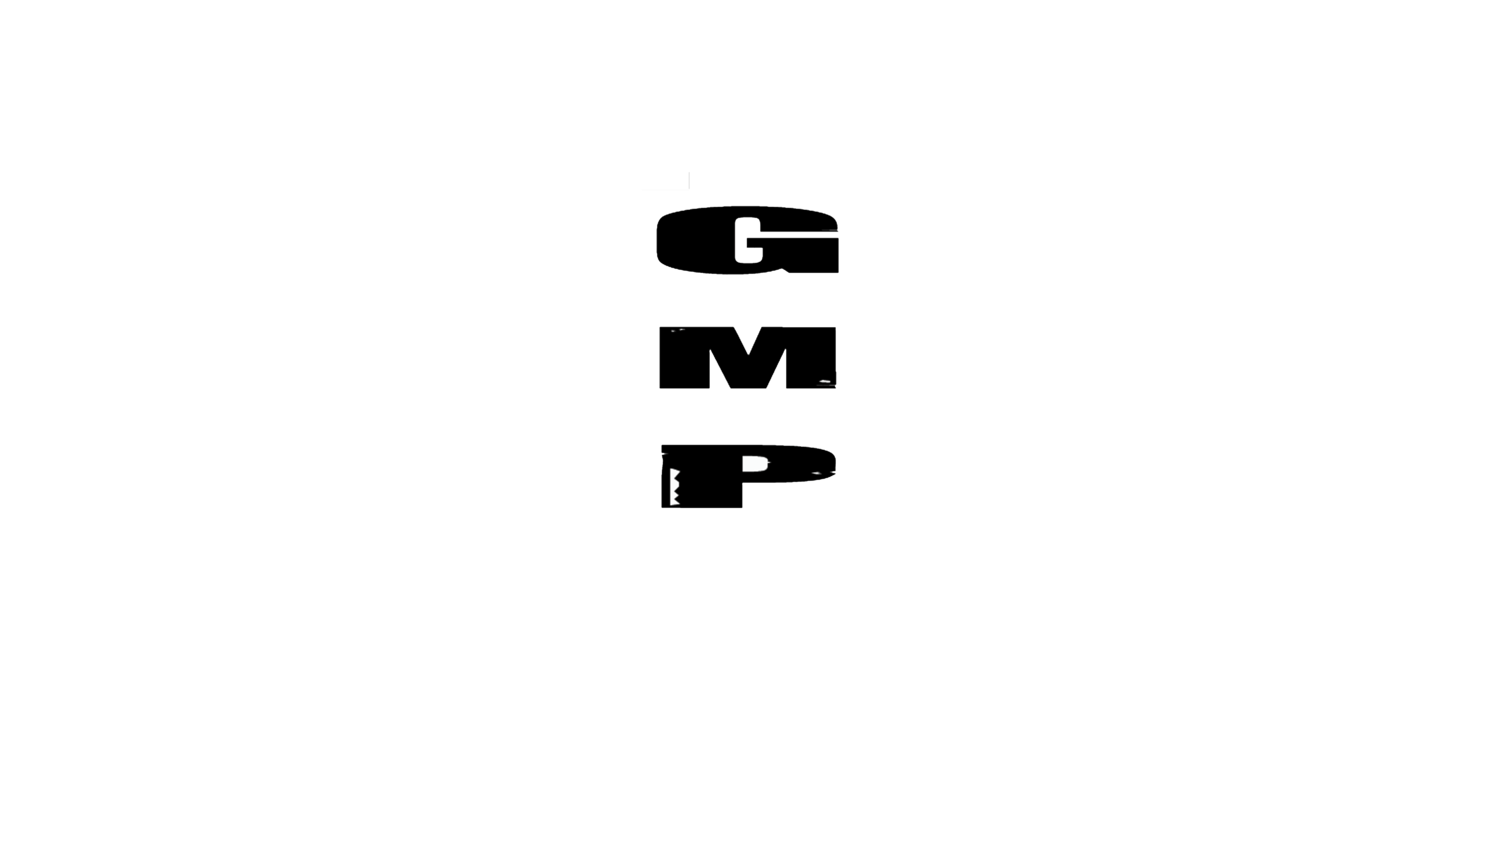 GMP Podcast Group